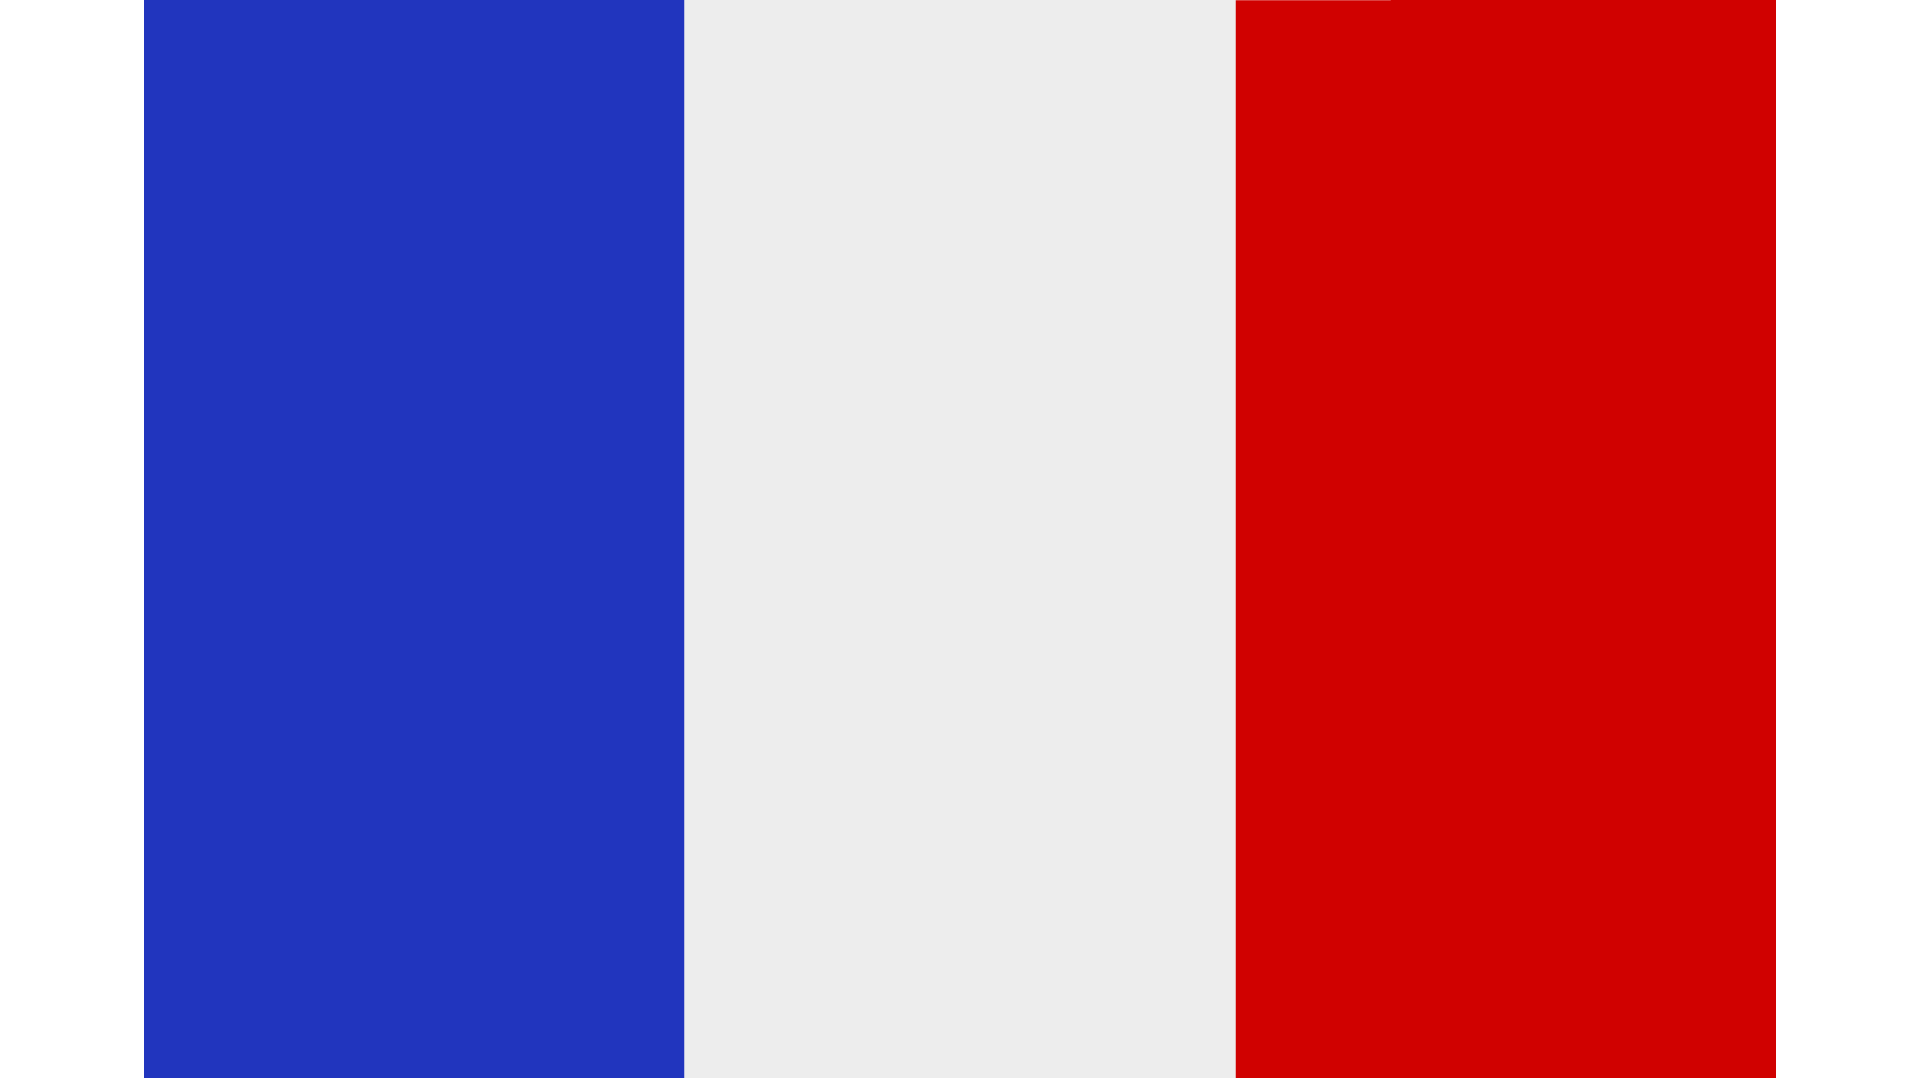 The flag of France with vertical stripes in blue, white and red.